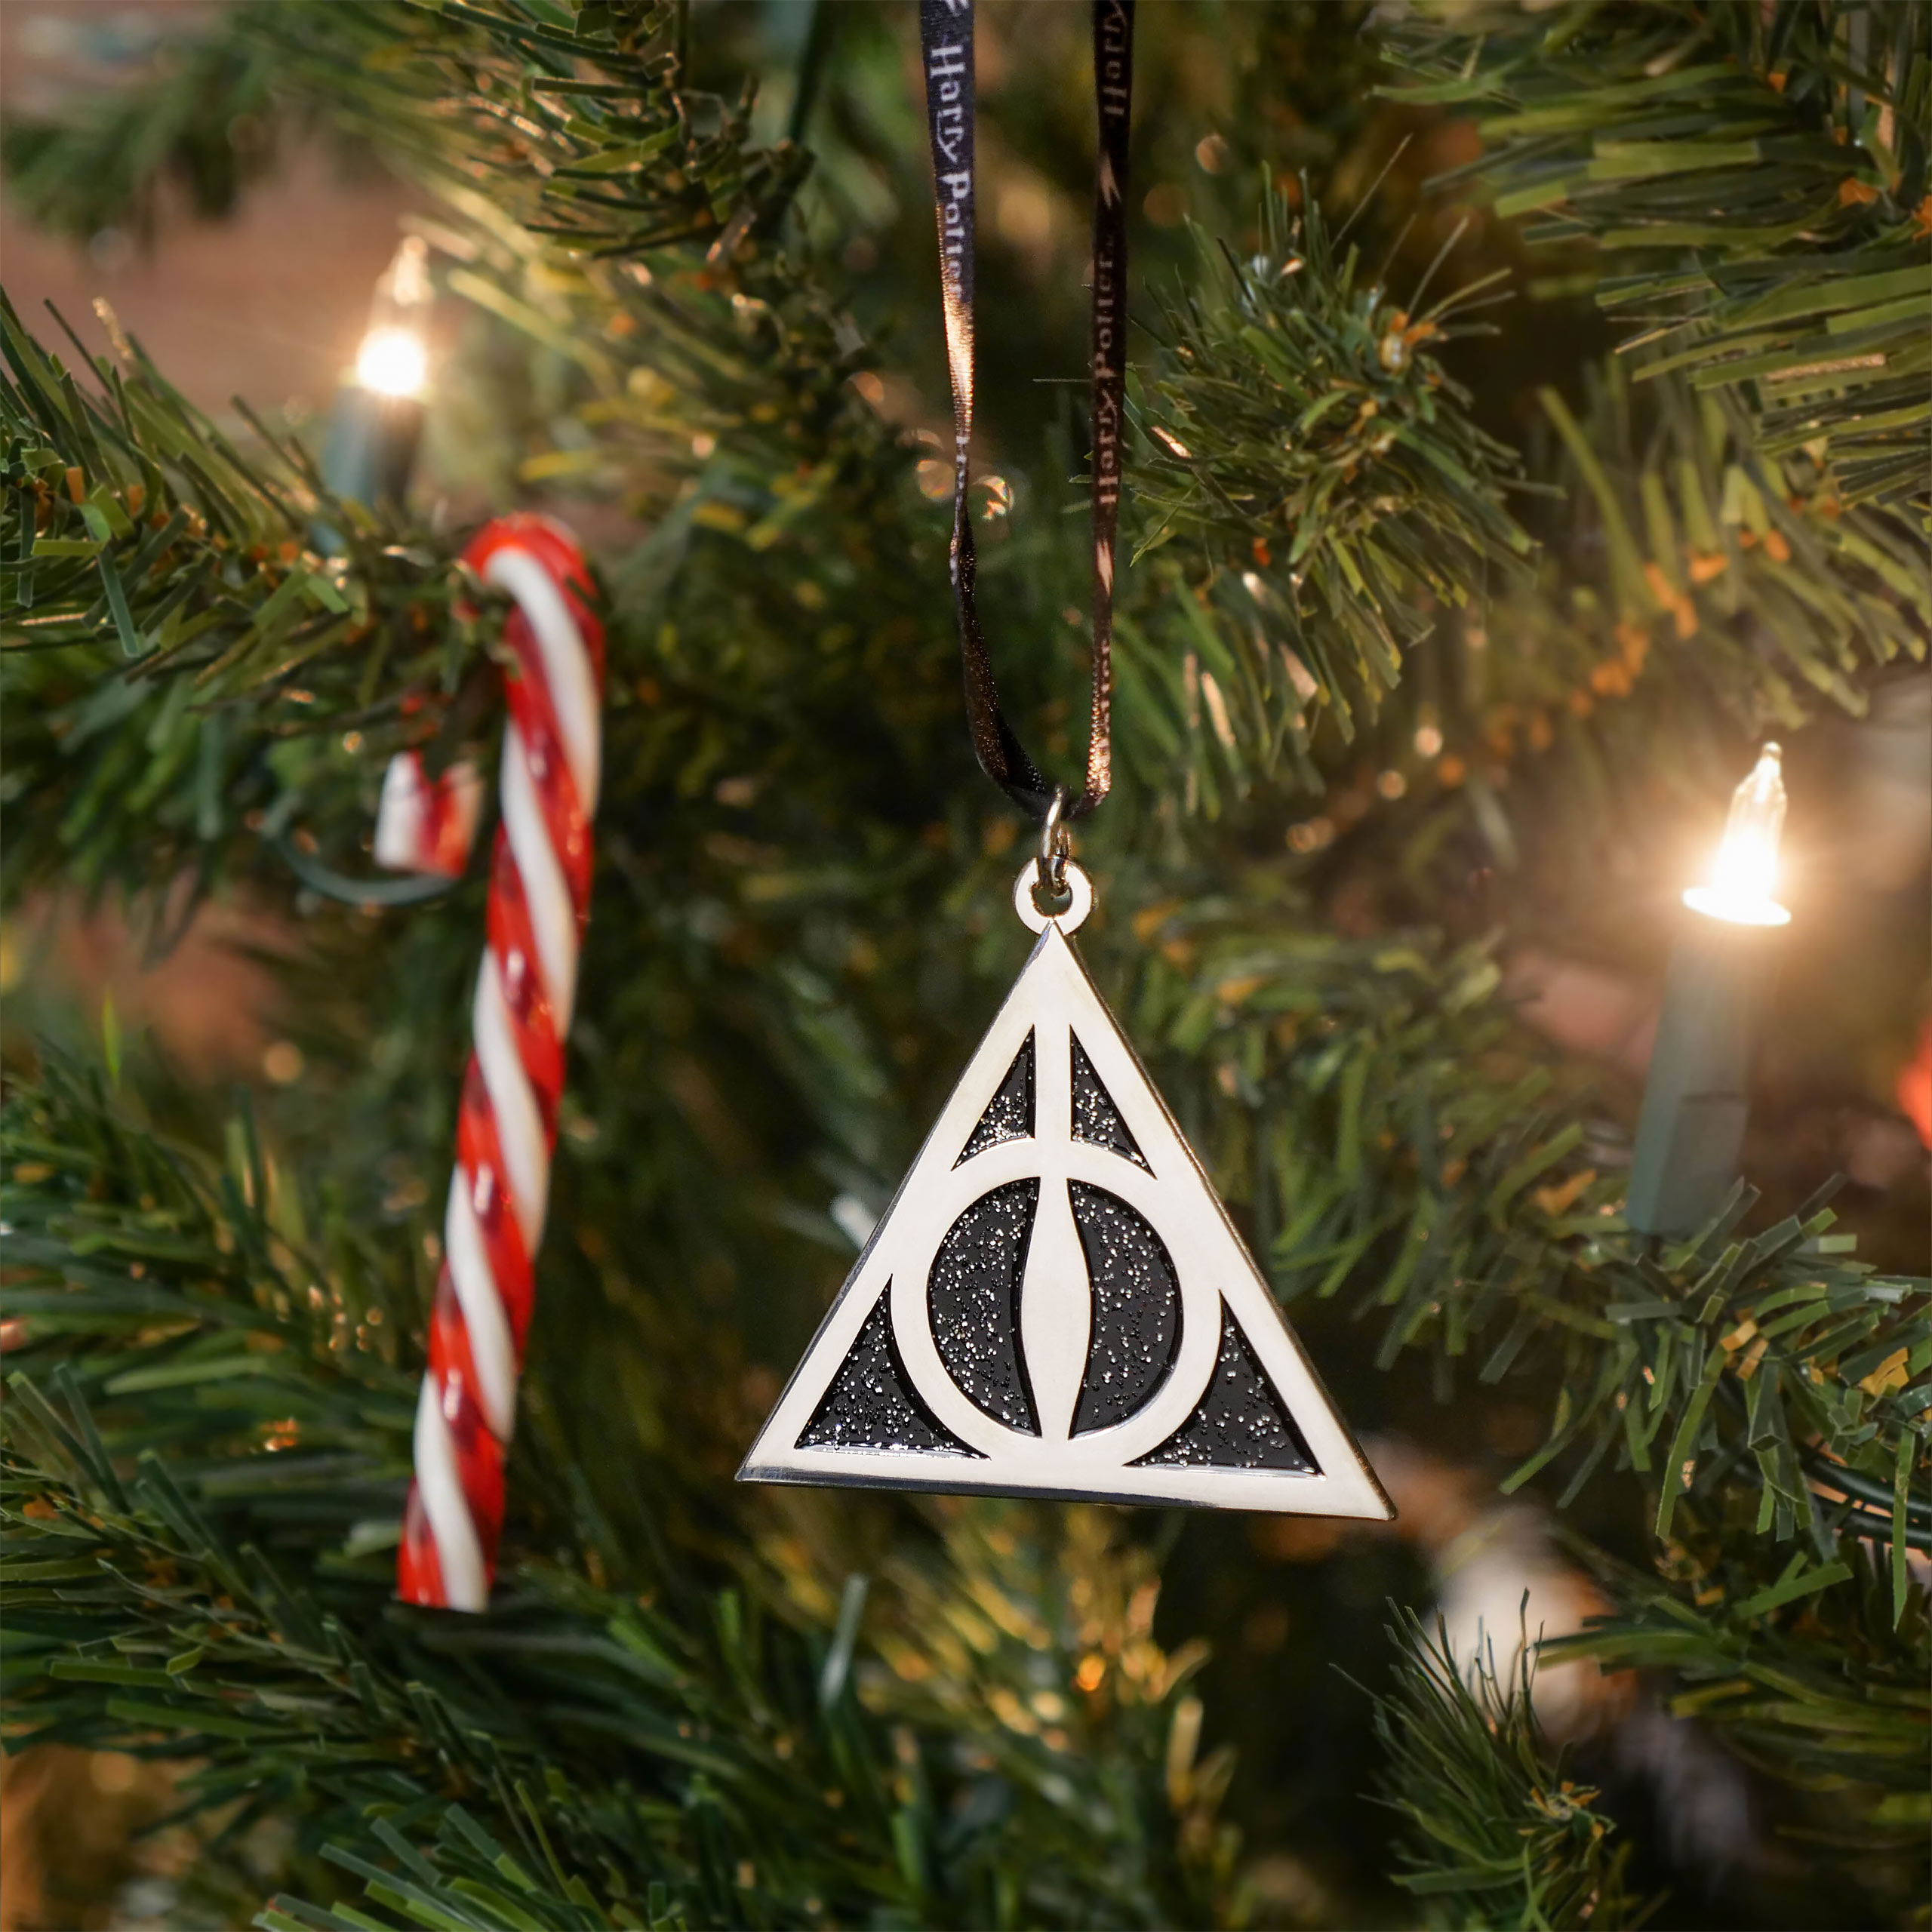 Harry Potter - Deathly Hallows Christmas tree ornament